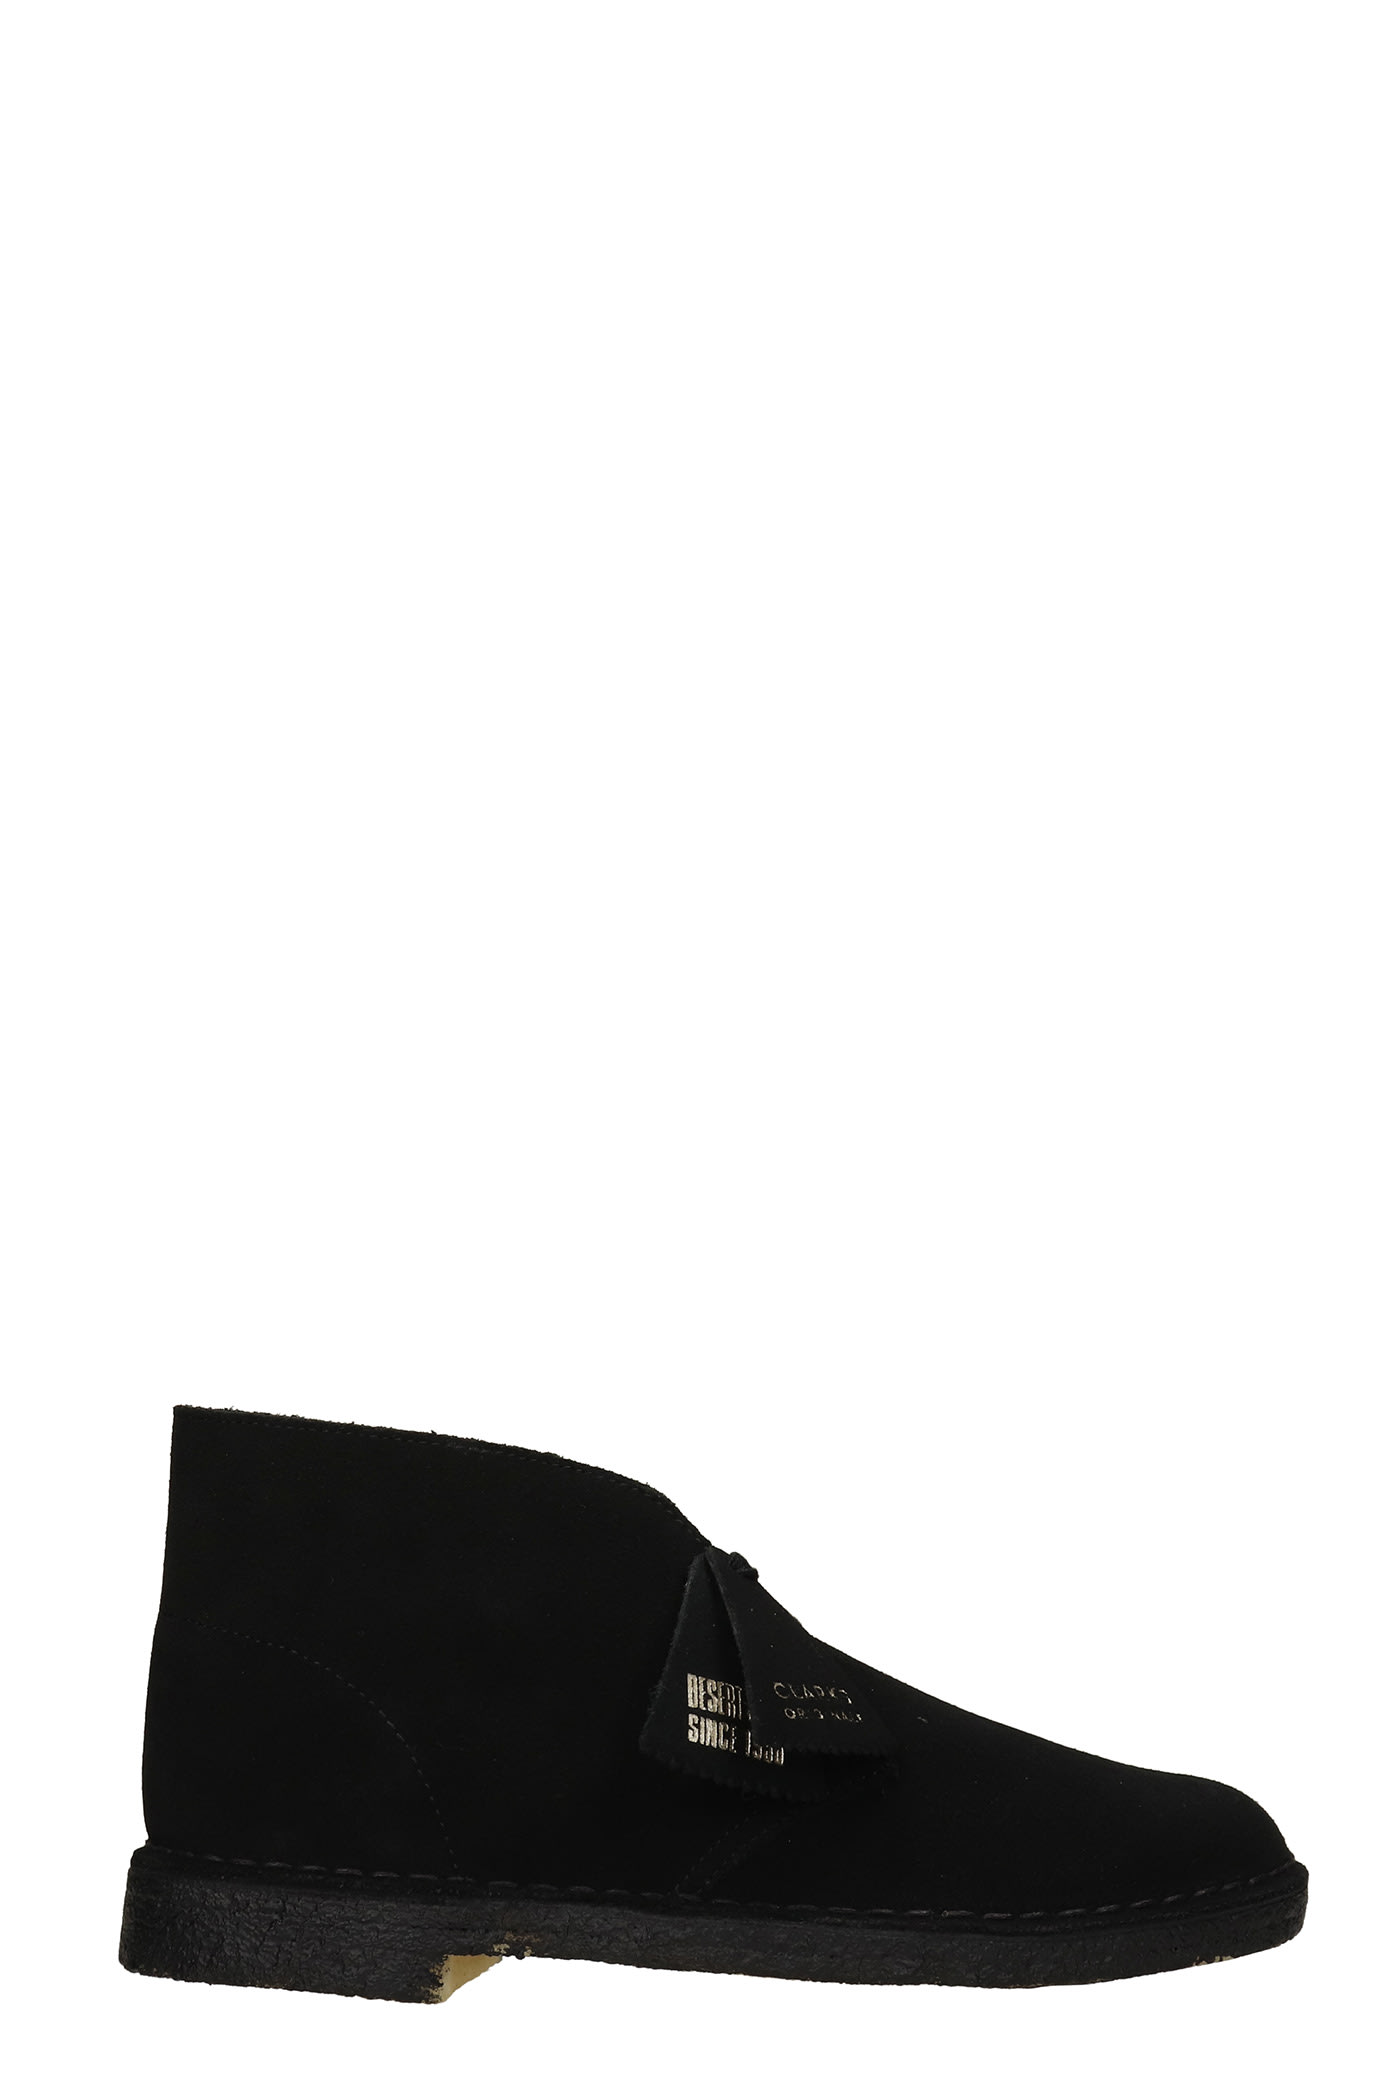 Clarks Desert Boot M Lace Up Shoes In Black Suede